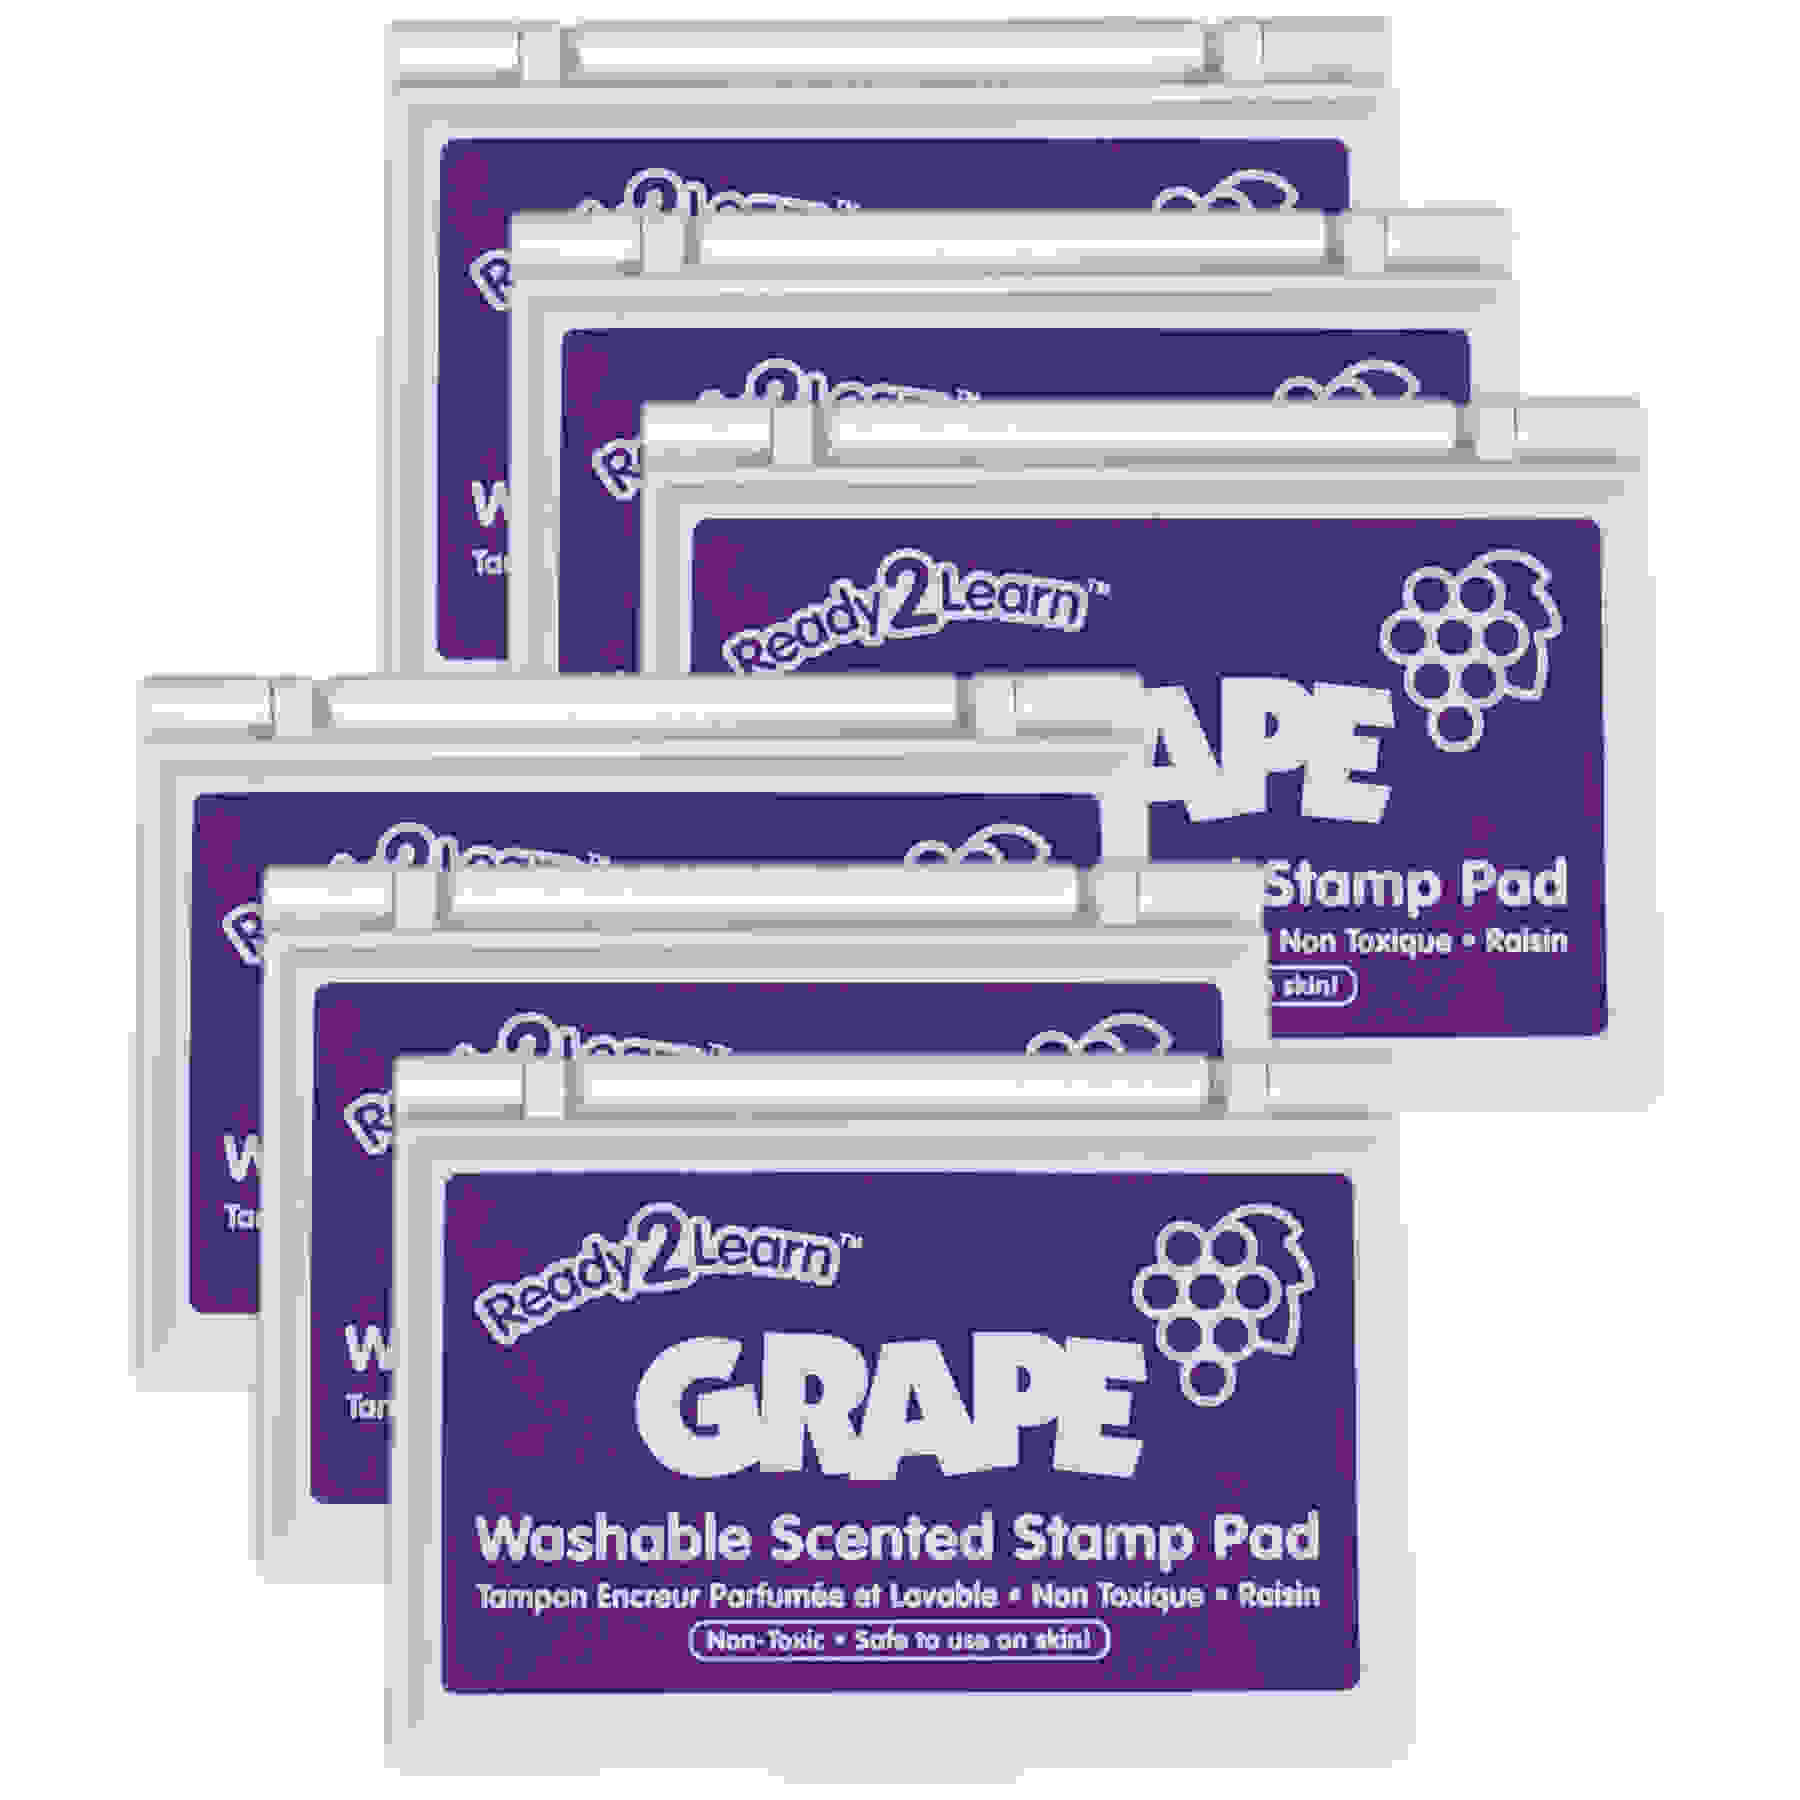 Washable Stamp Pad - Grape Scented, Purple - Pack of 6